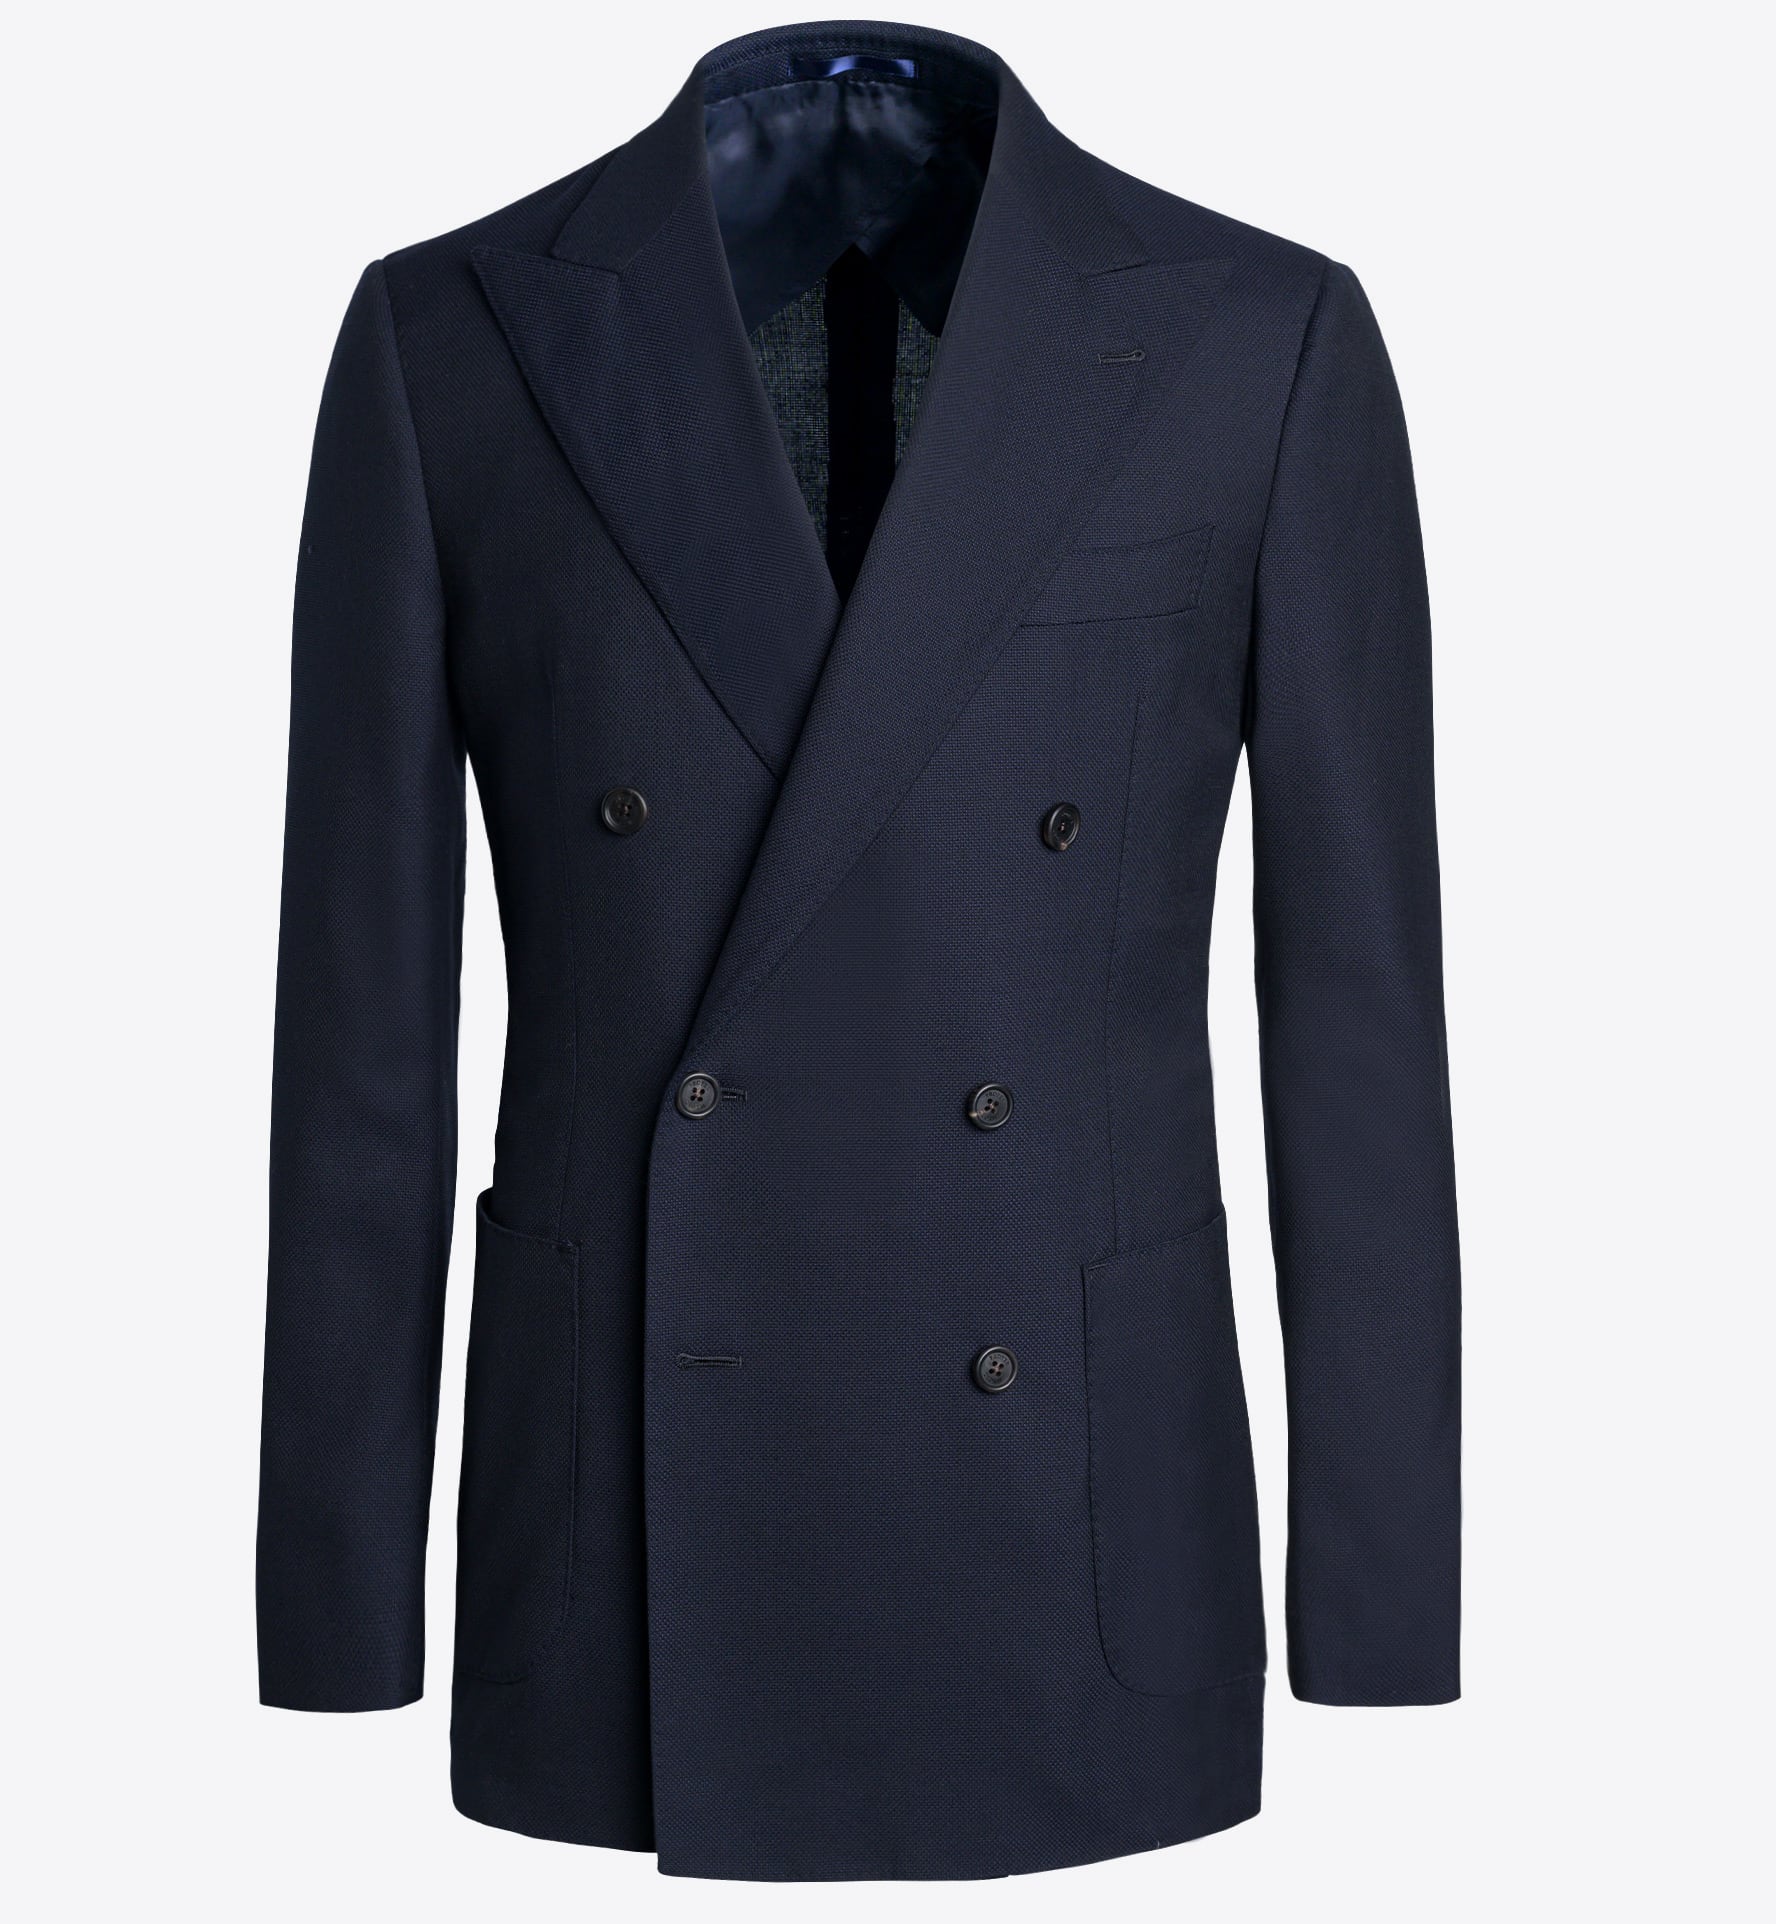 Bedford Navy Wool Hopsack Double Breasted Jacket - Custom Fit Tailored ...